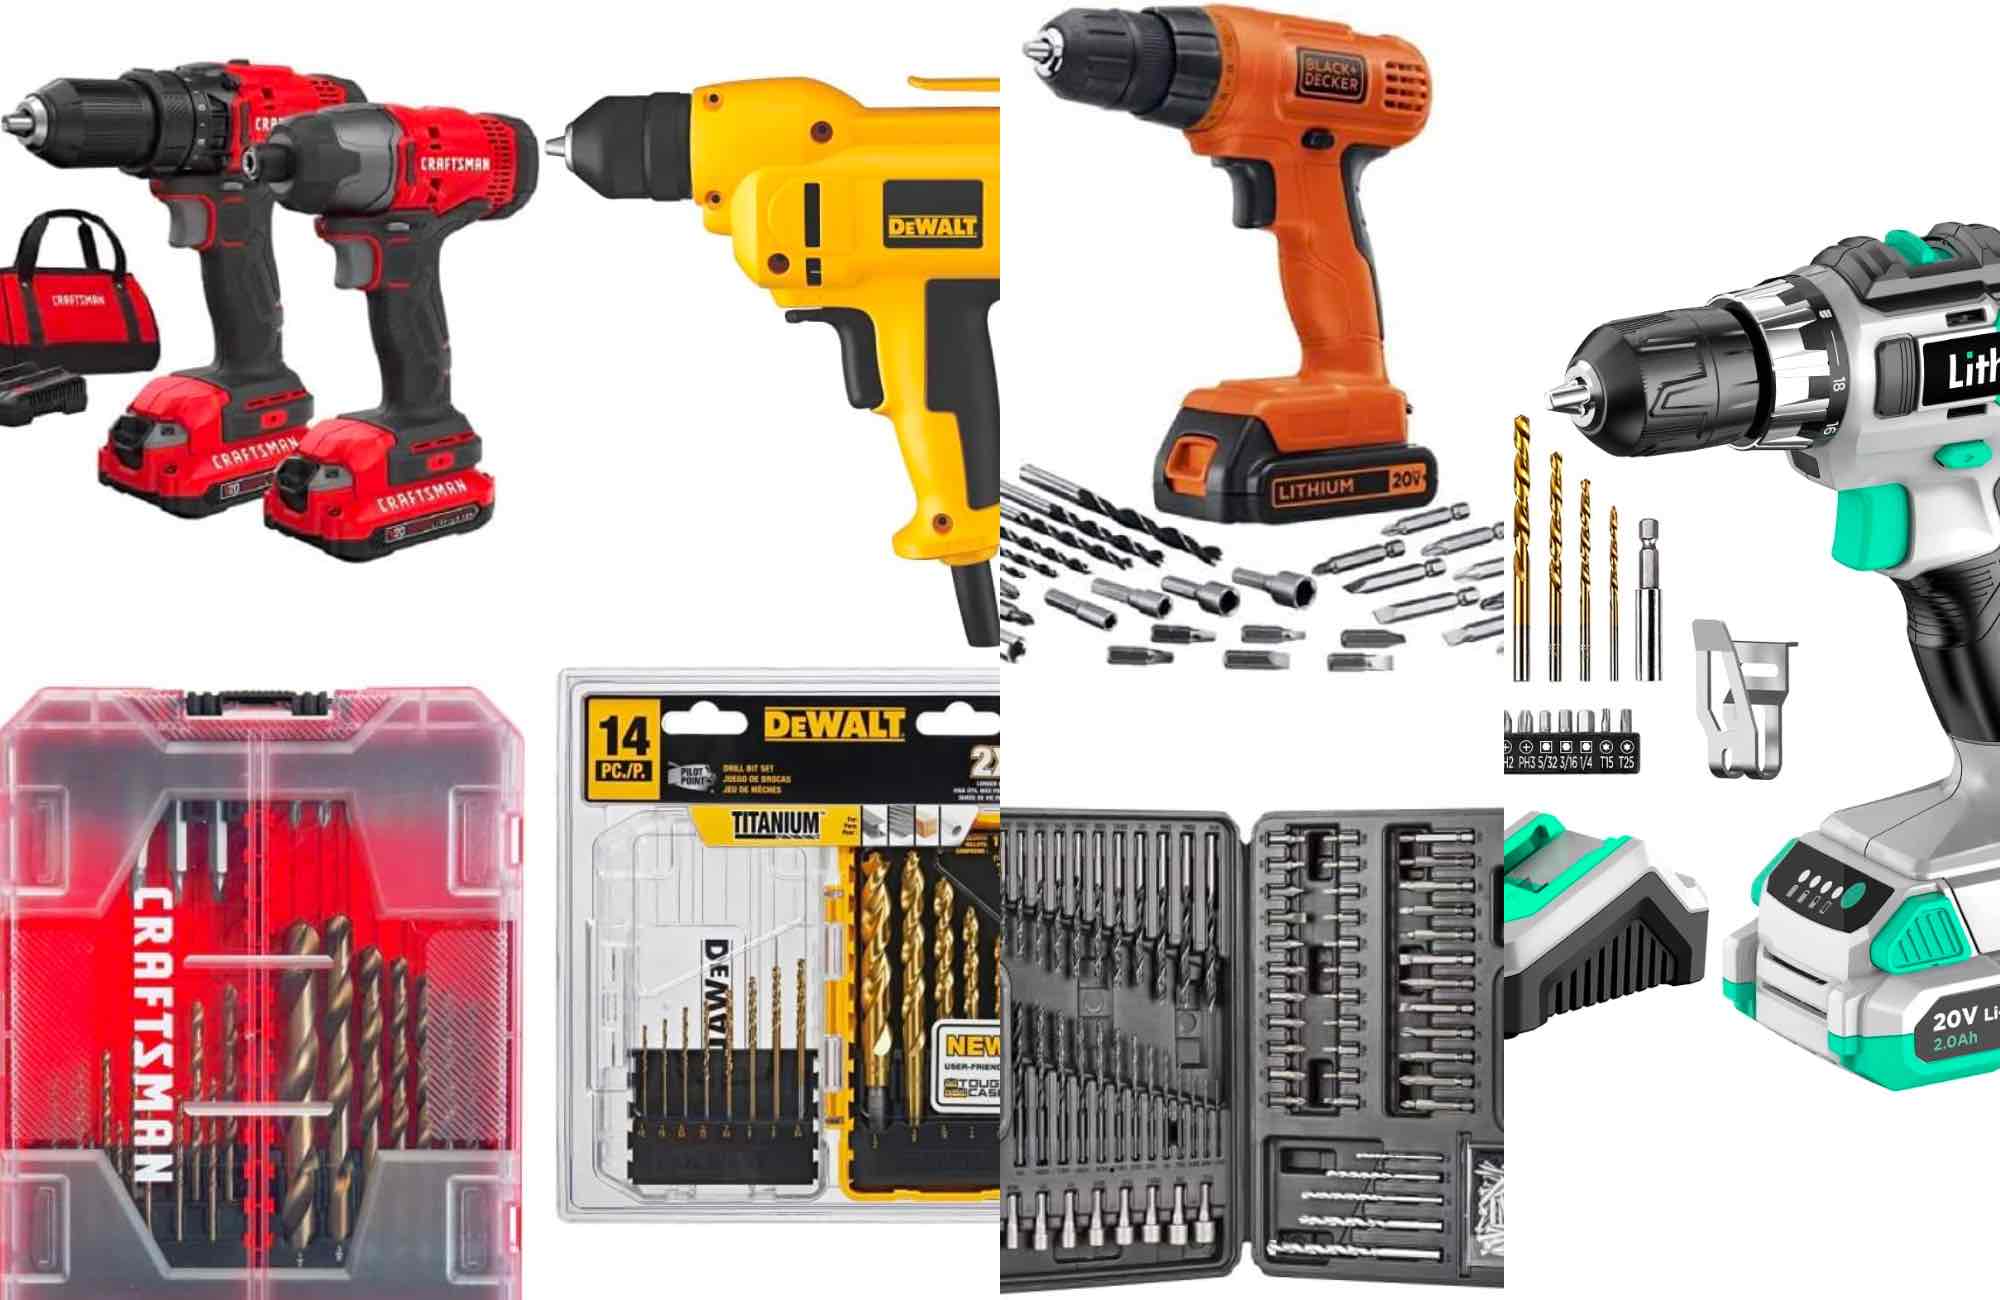 The best drill sets